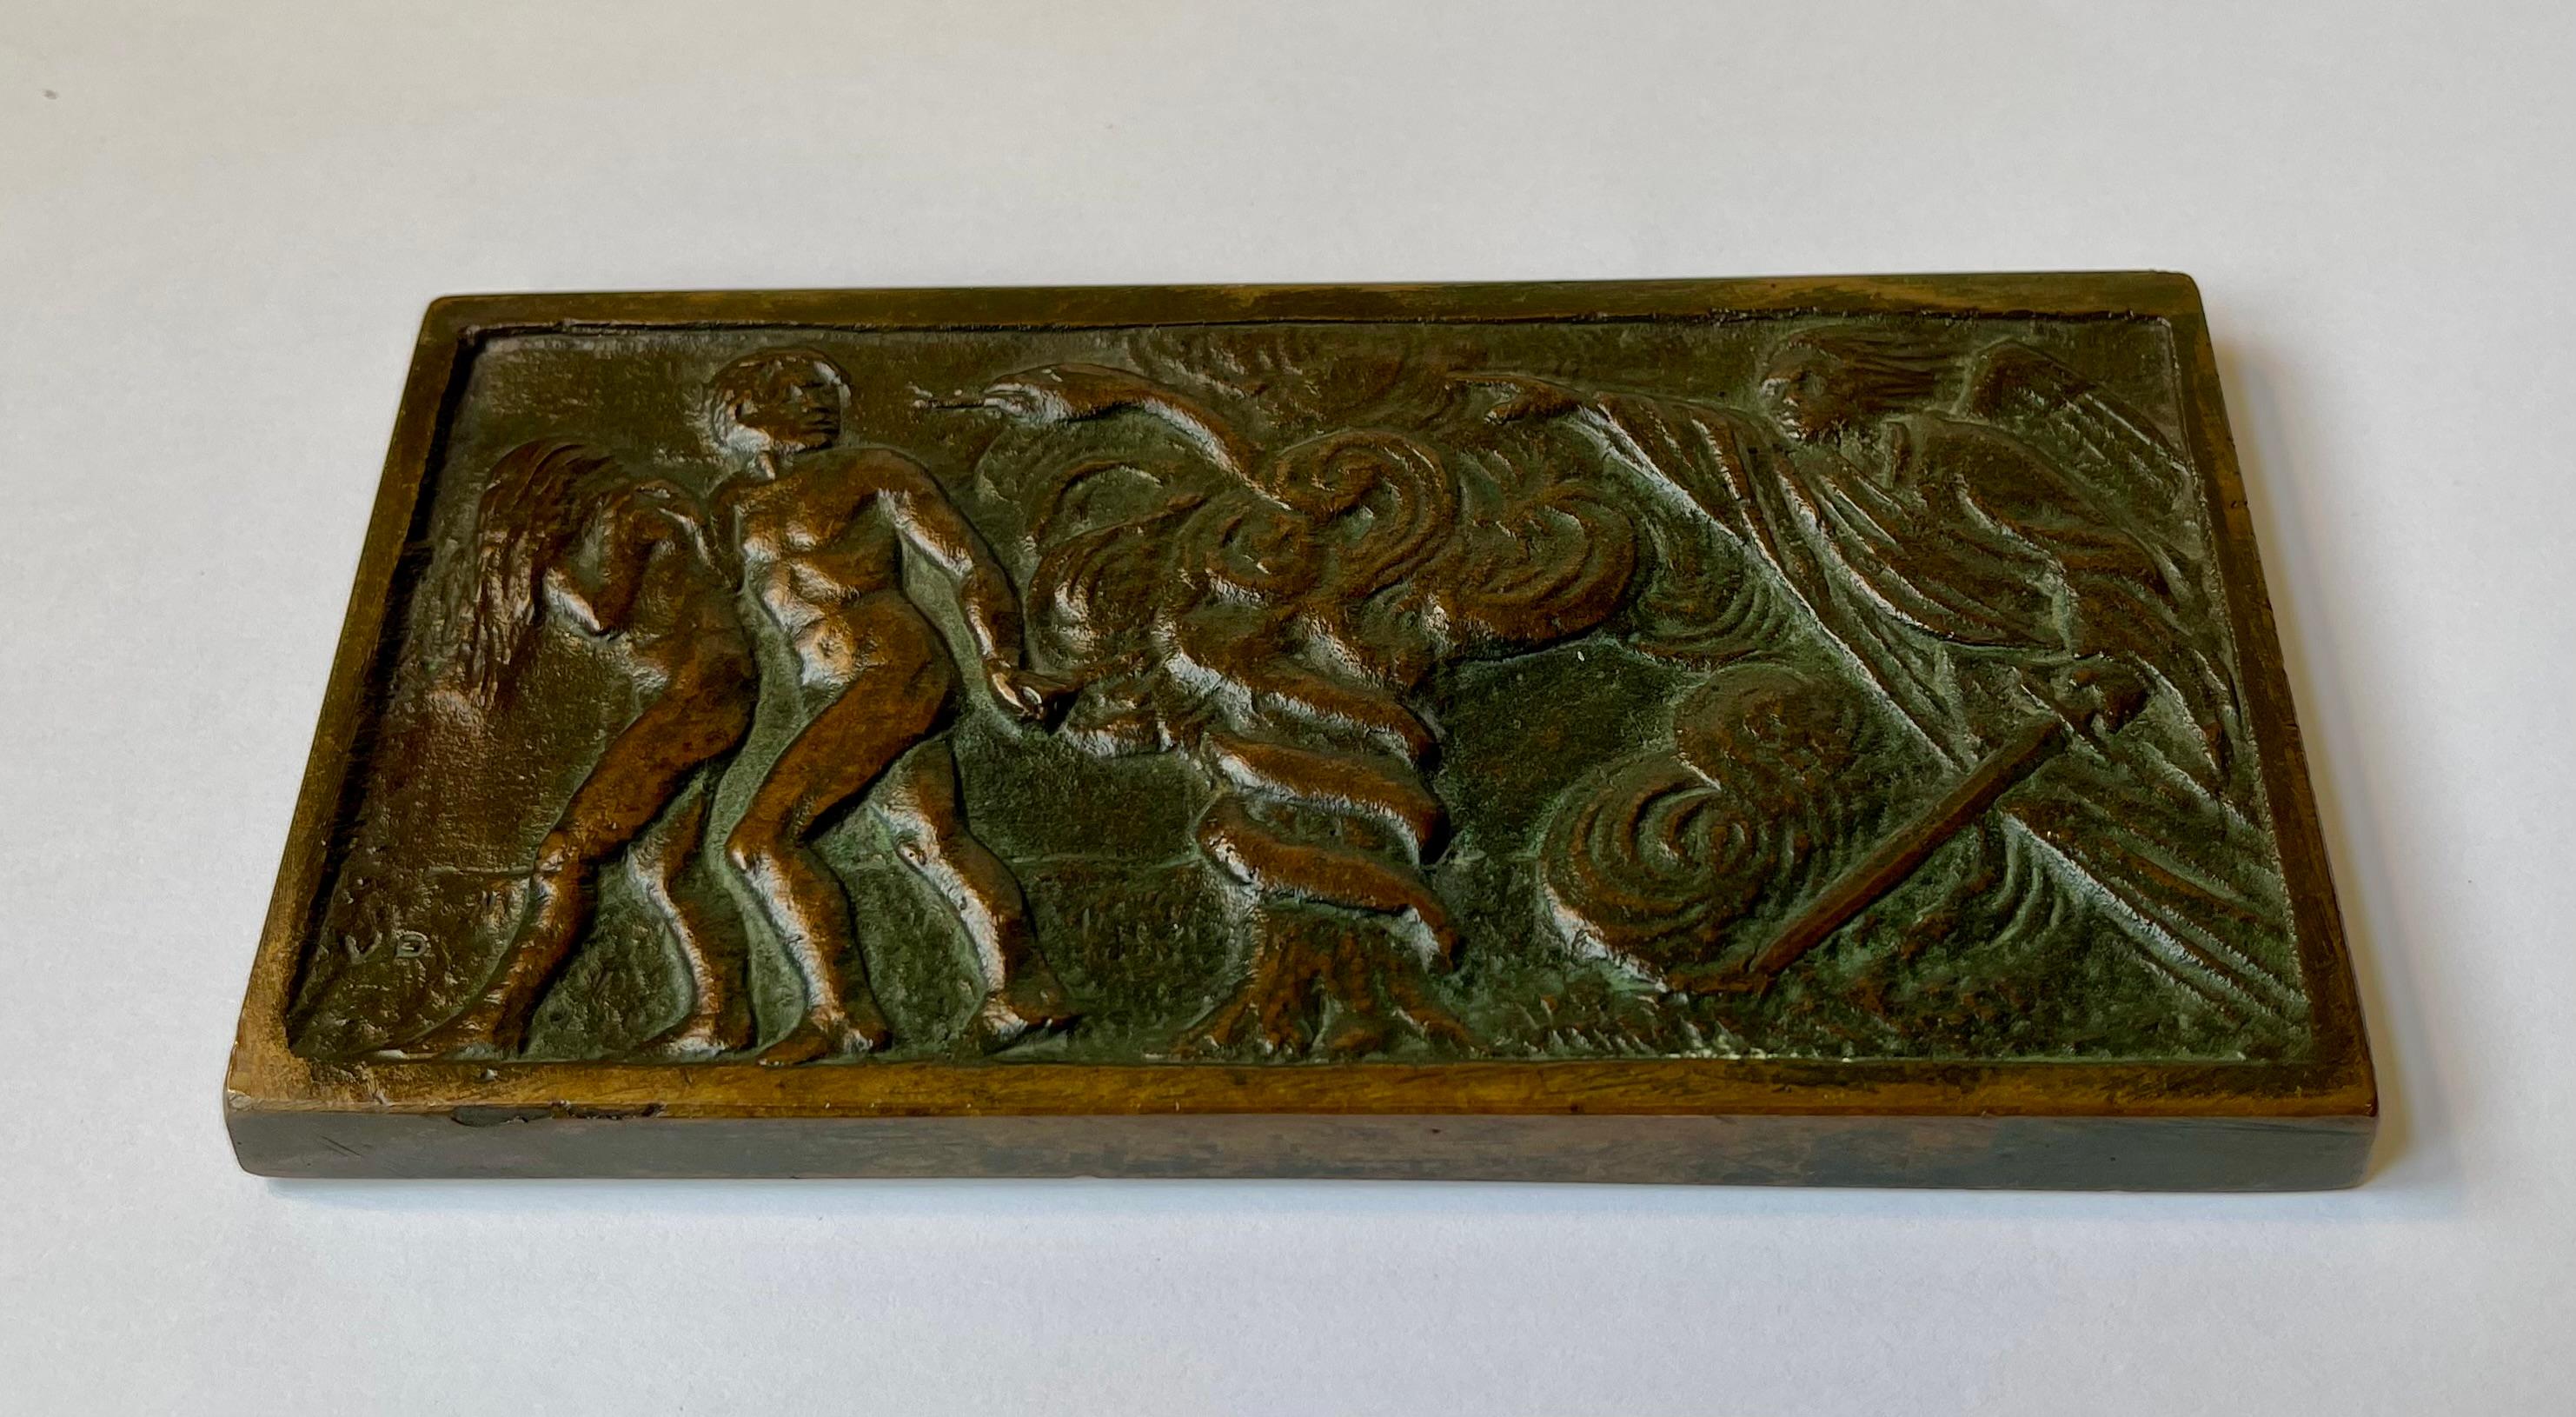 Ornate and beautifully patinated bronze relief plaque depicting the expulsion of Adam and Eve from the Garden of Eden by the archangel Jophiel. Its signed VP to its left corner. It was made in Italy during the 19th century. Measurements: